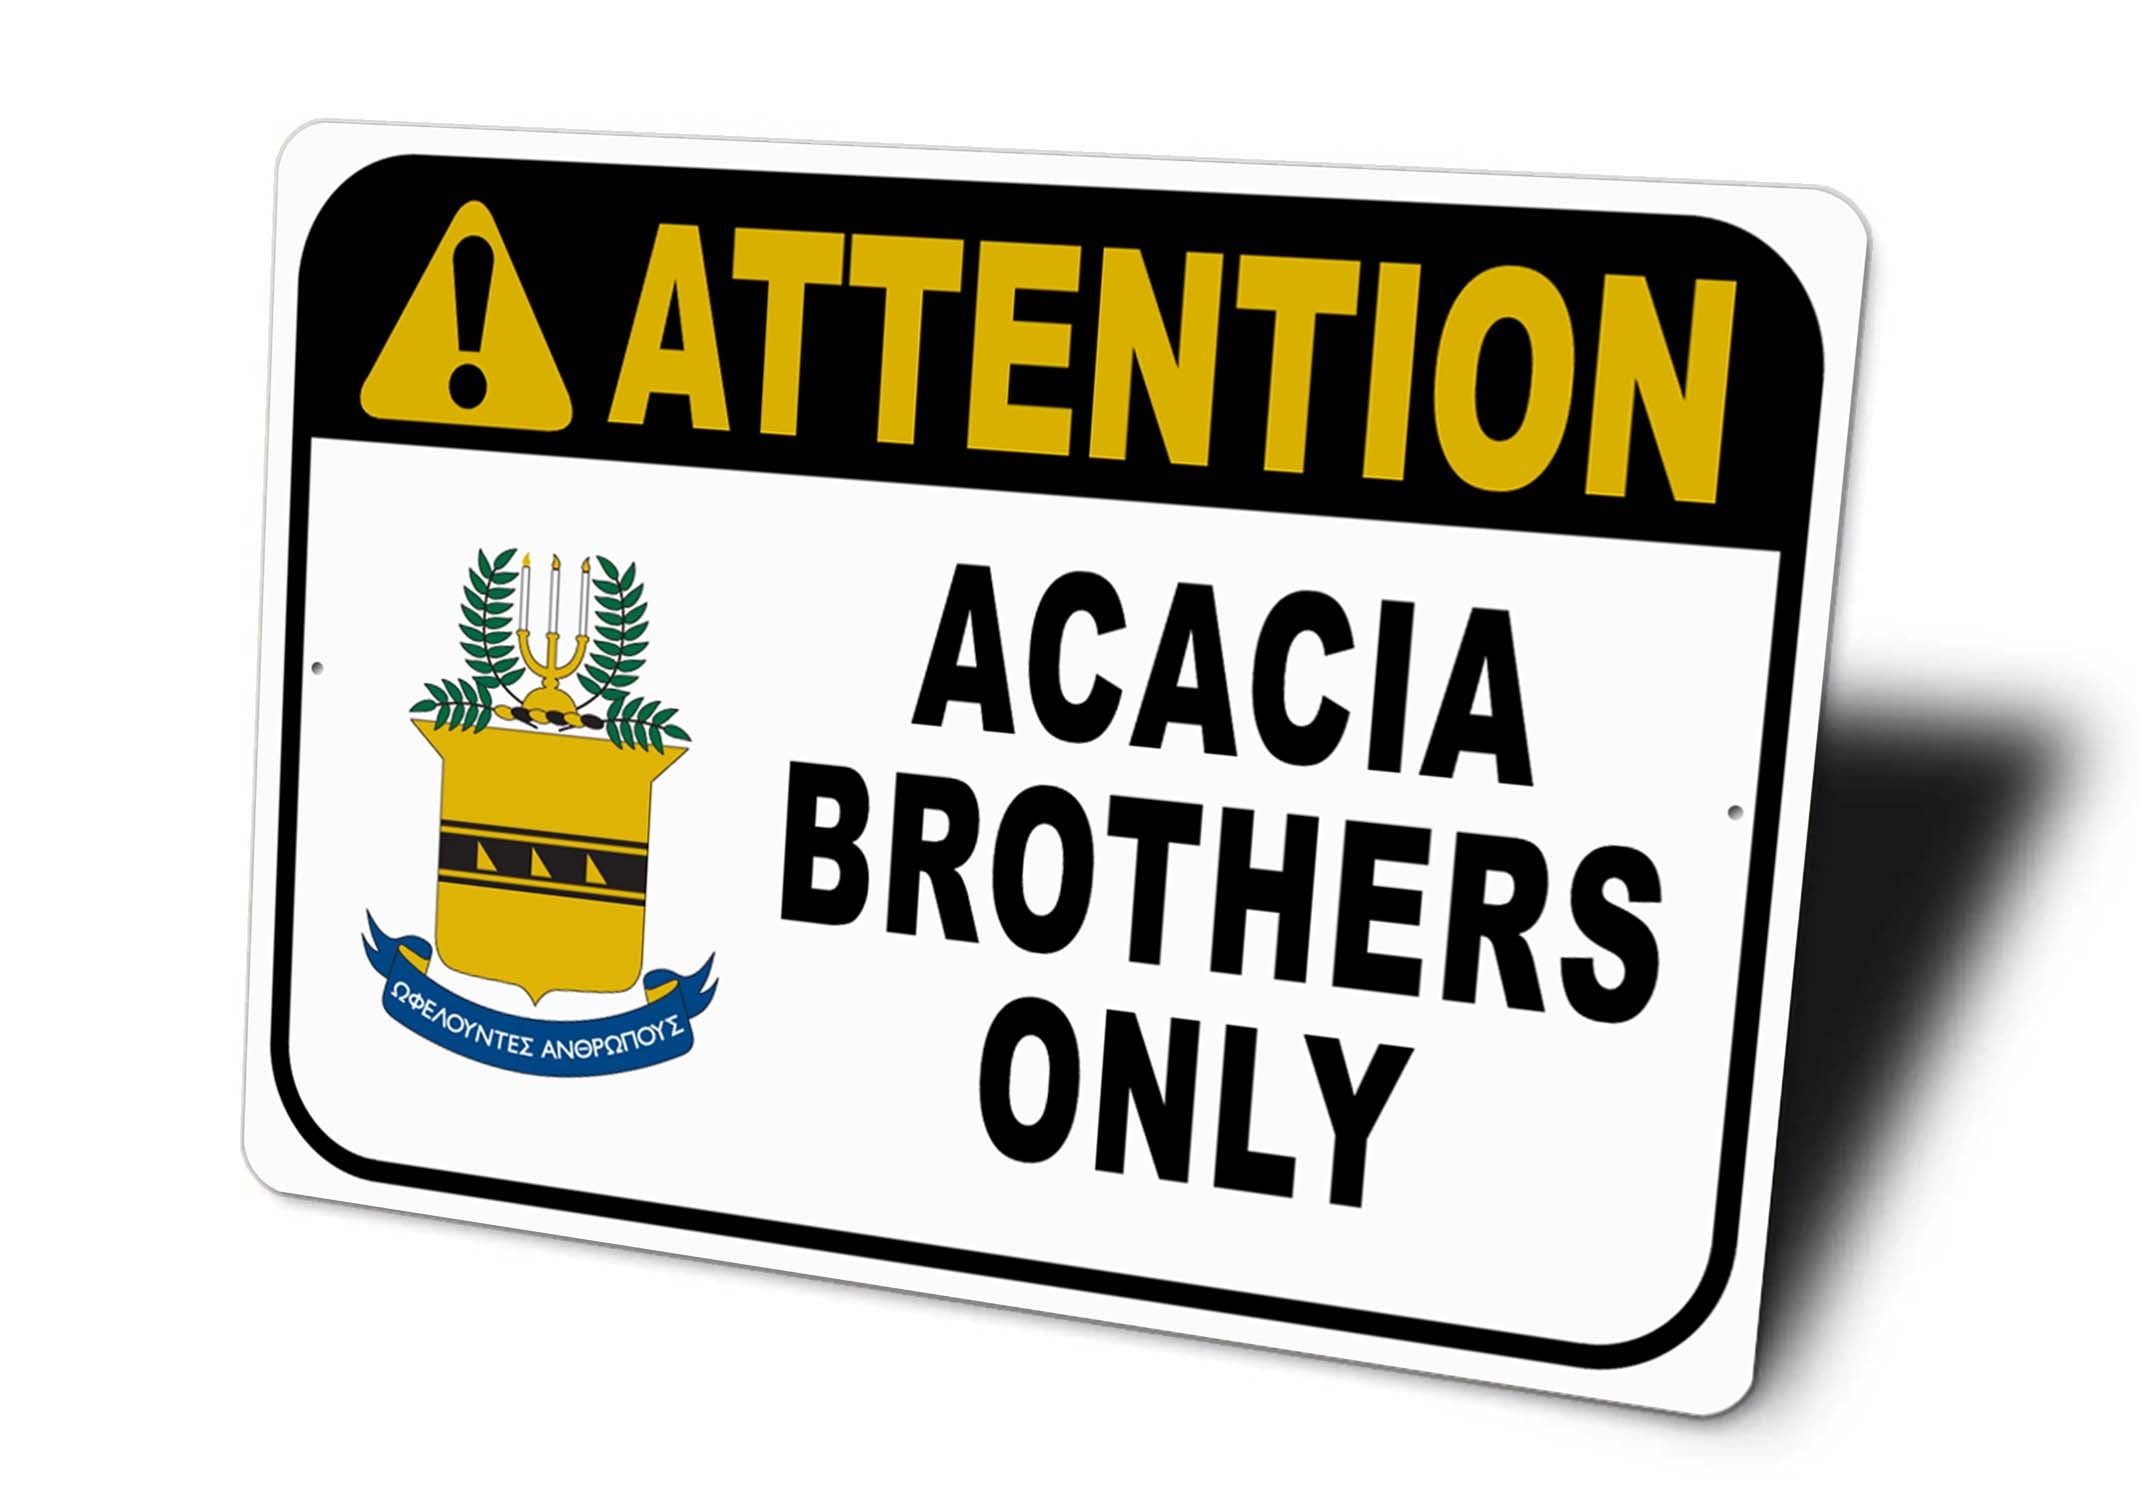 Acacia Brothers Only Attention Sign